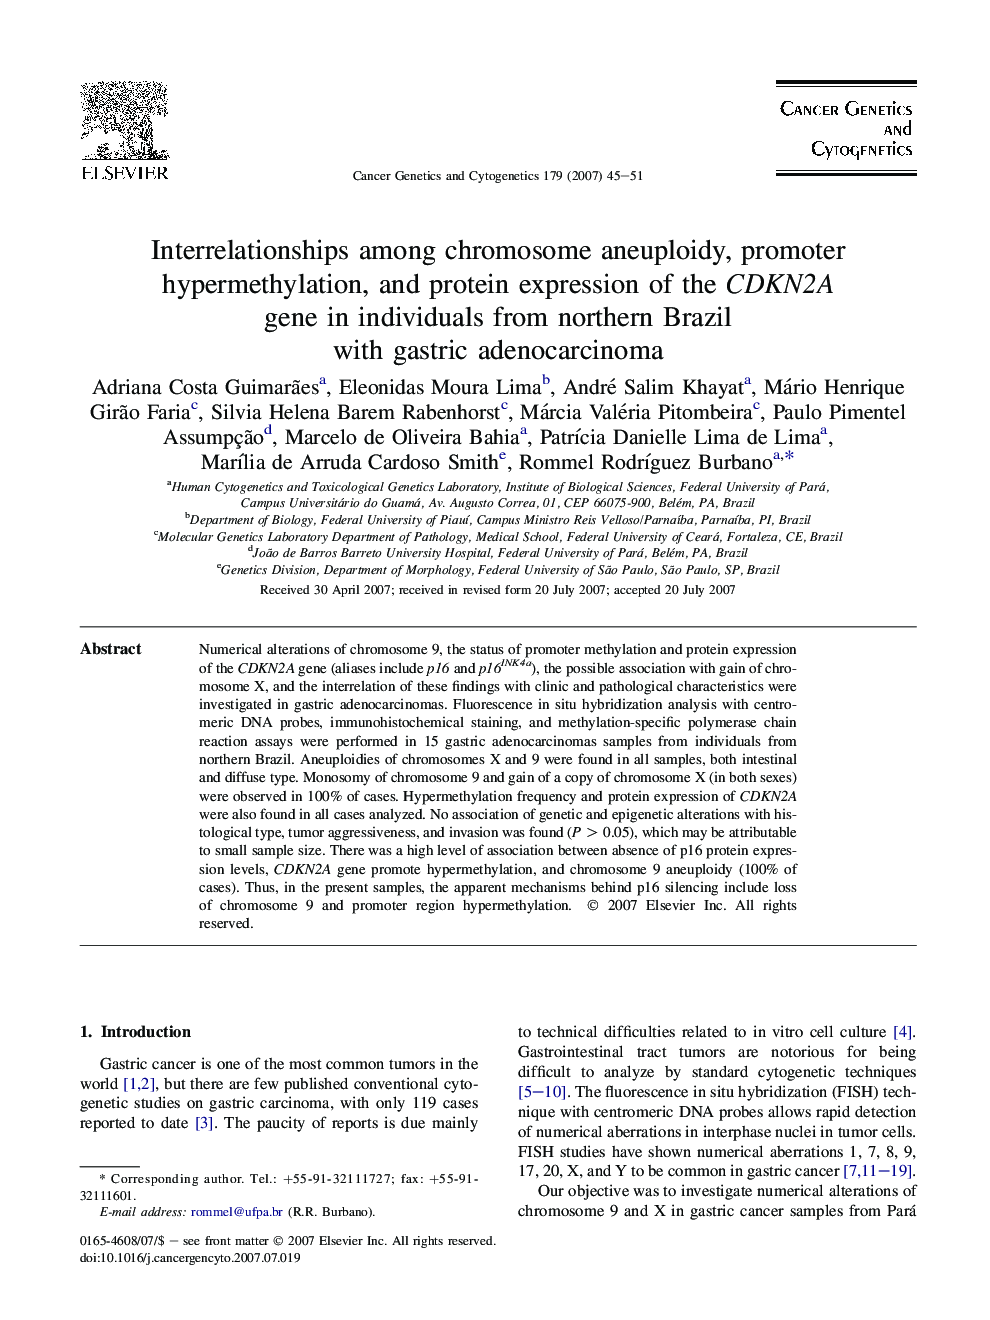 Interrelationships among chromosome aneuploidy, promoter hypermethylation, and protein expression of the CDKN2A gene in individuals from northern Brazil with gastric adenocarcinoma